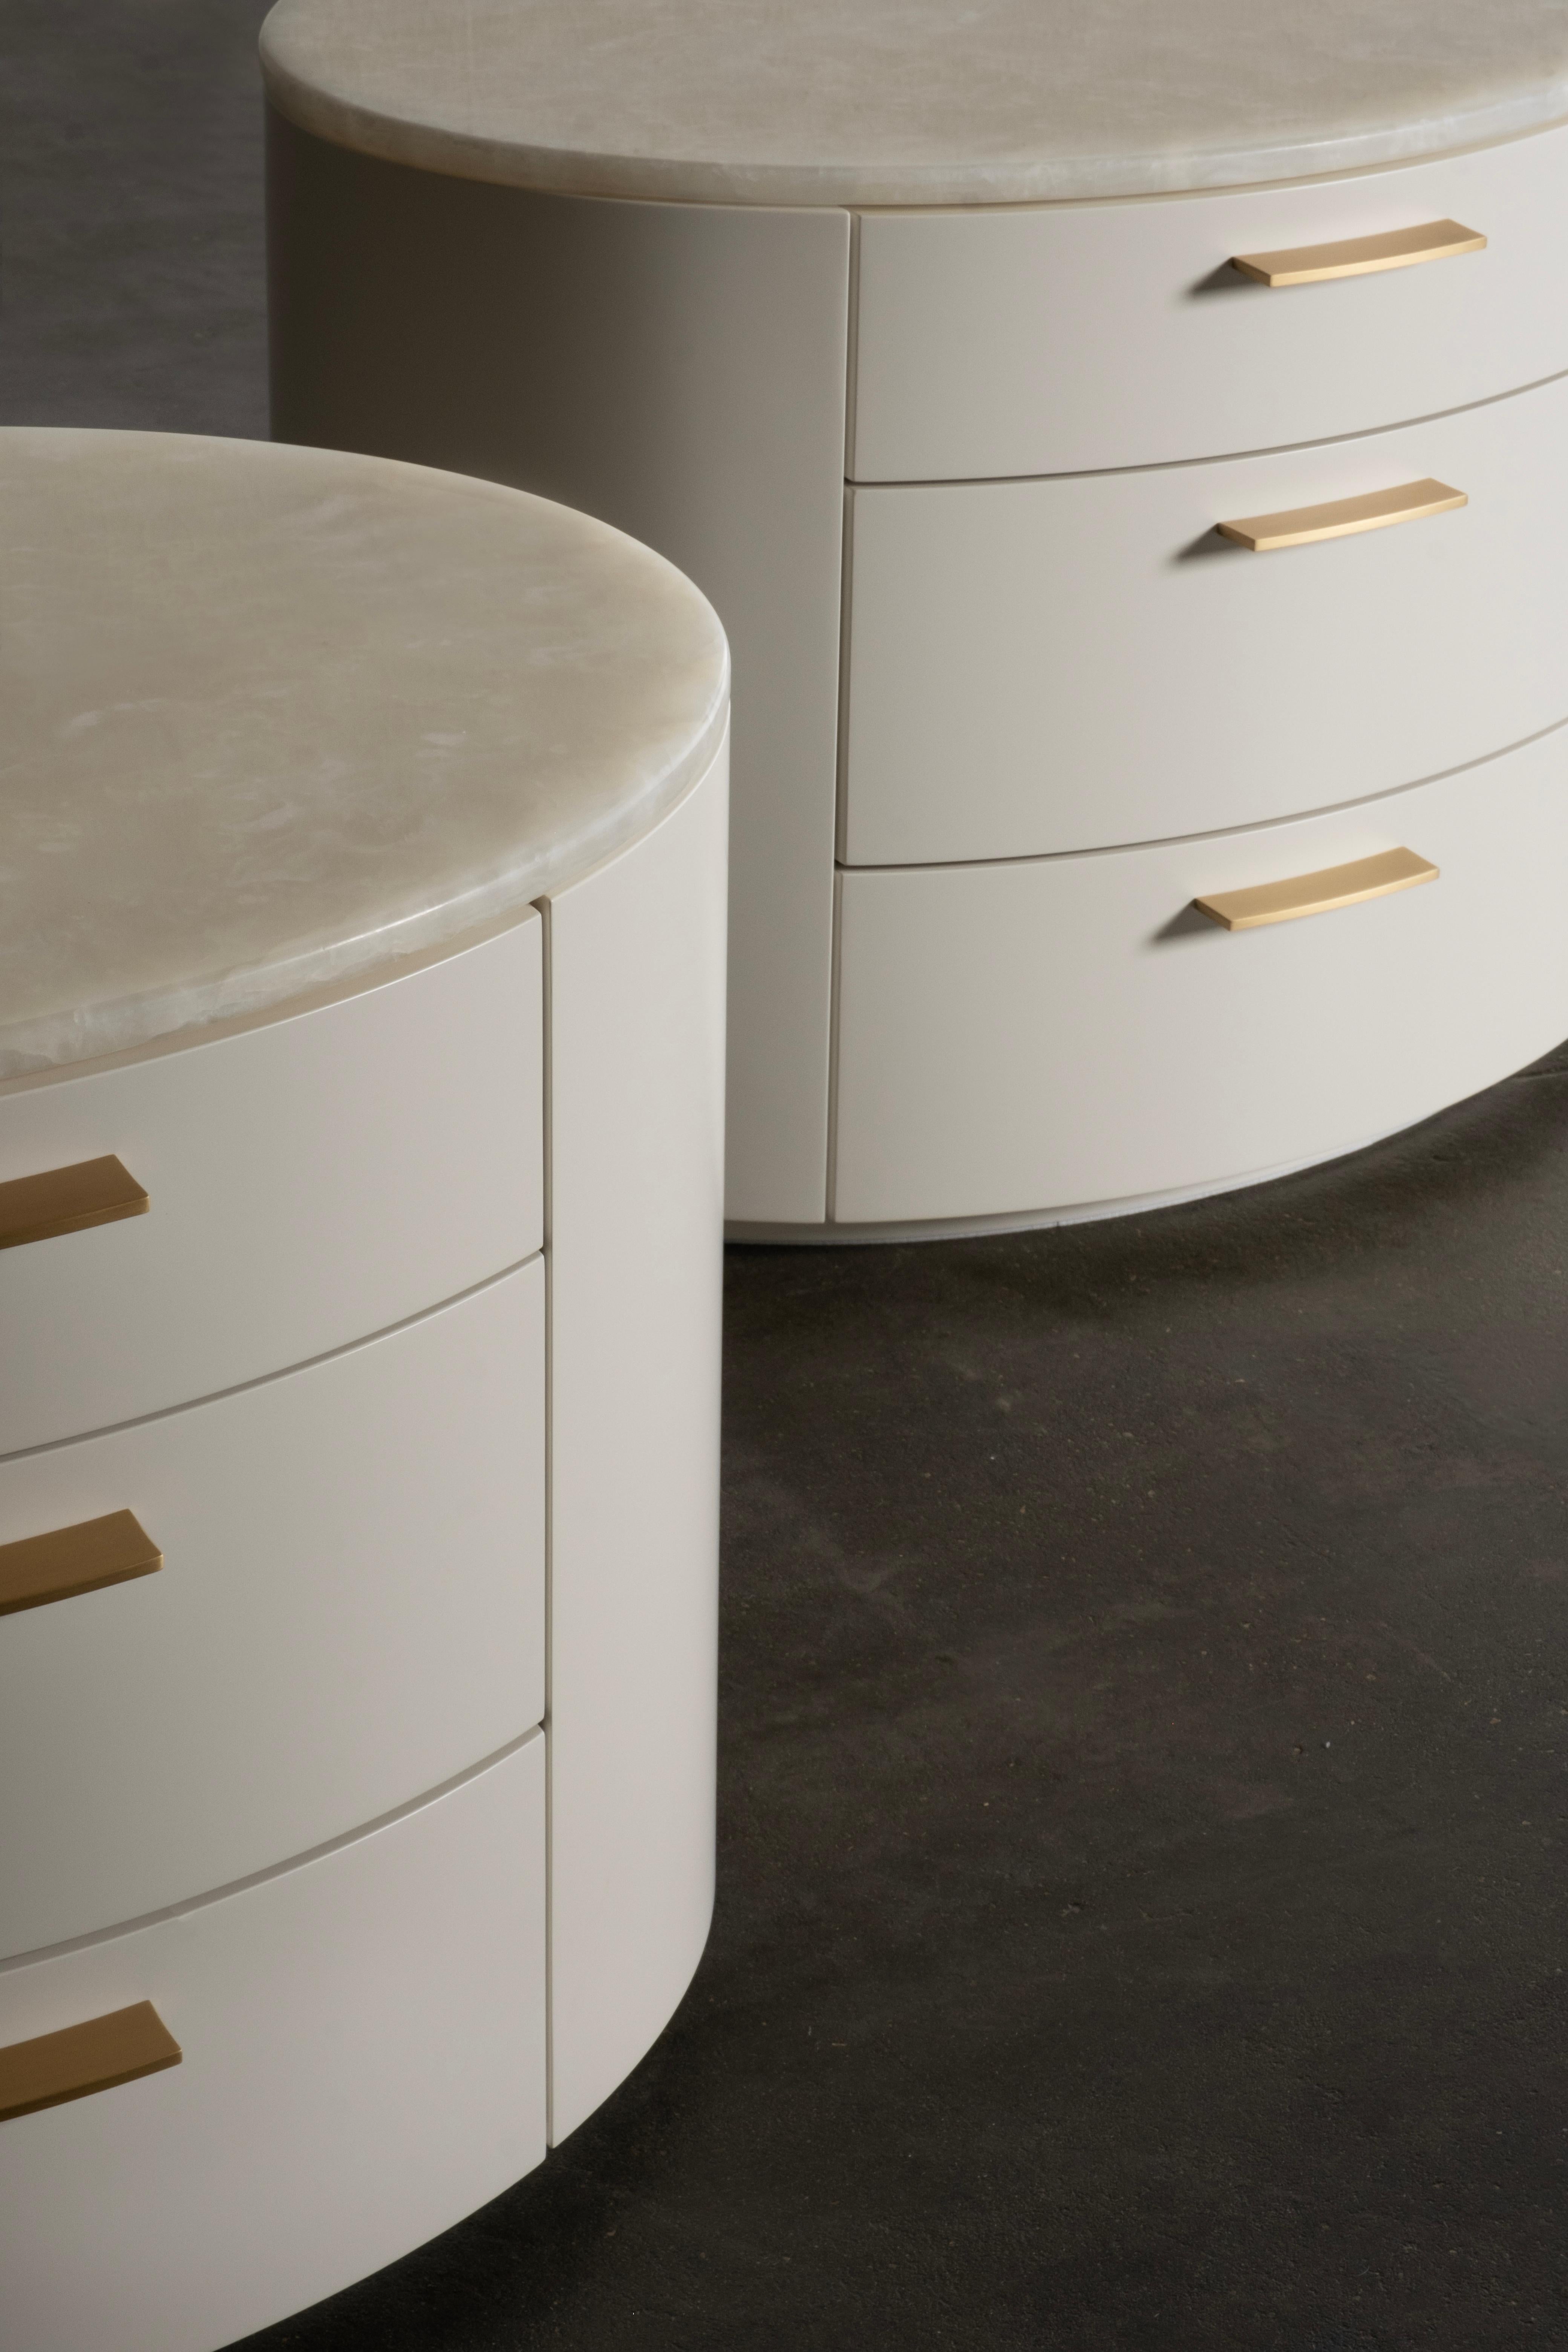 Nilo Nightstands, Contemporary Collection, handcrafted in Portugal - Europe by Greenapple.

Nilo Nightstand brings nature into your interior space through its organic and sweeping curves. Inspired by the natural flowing lines found in the rivers,